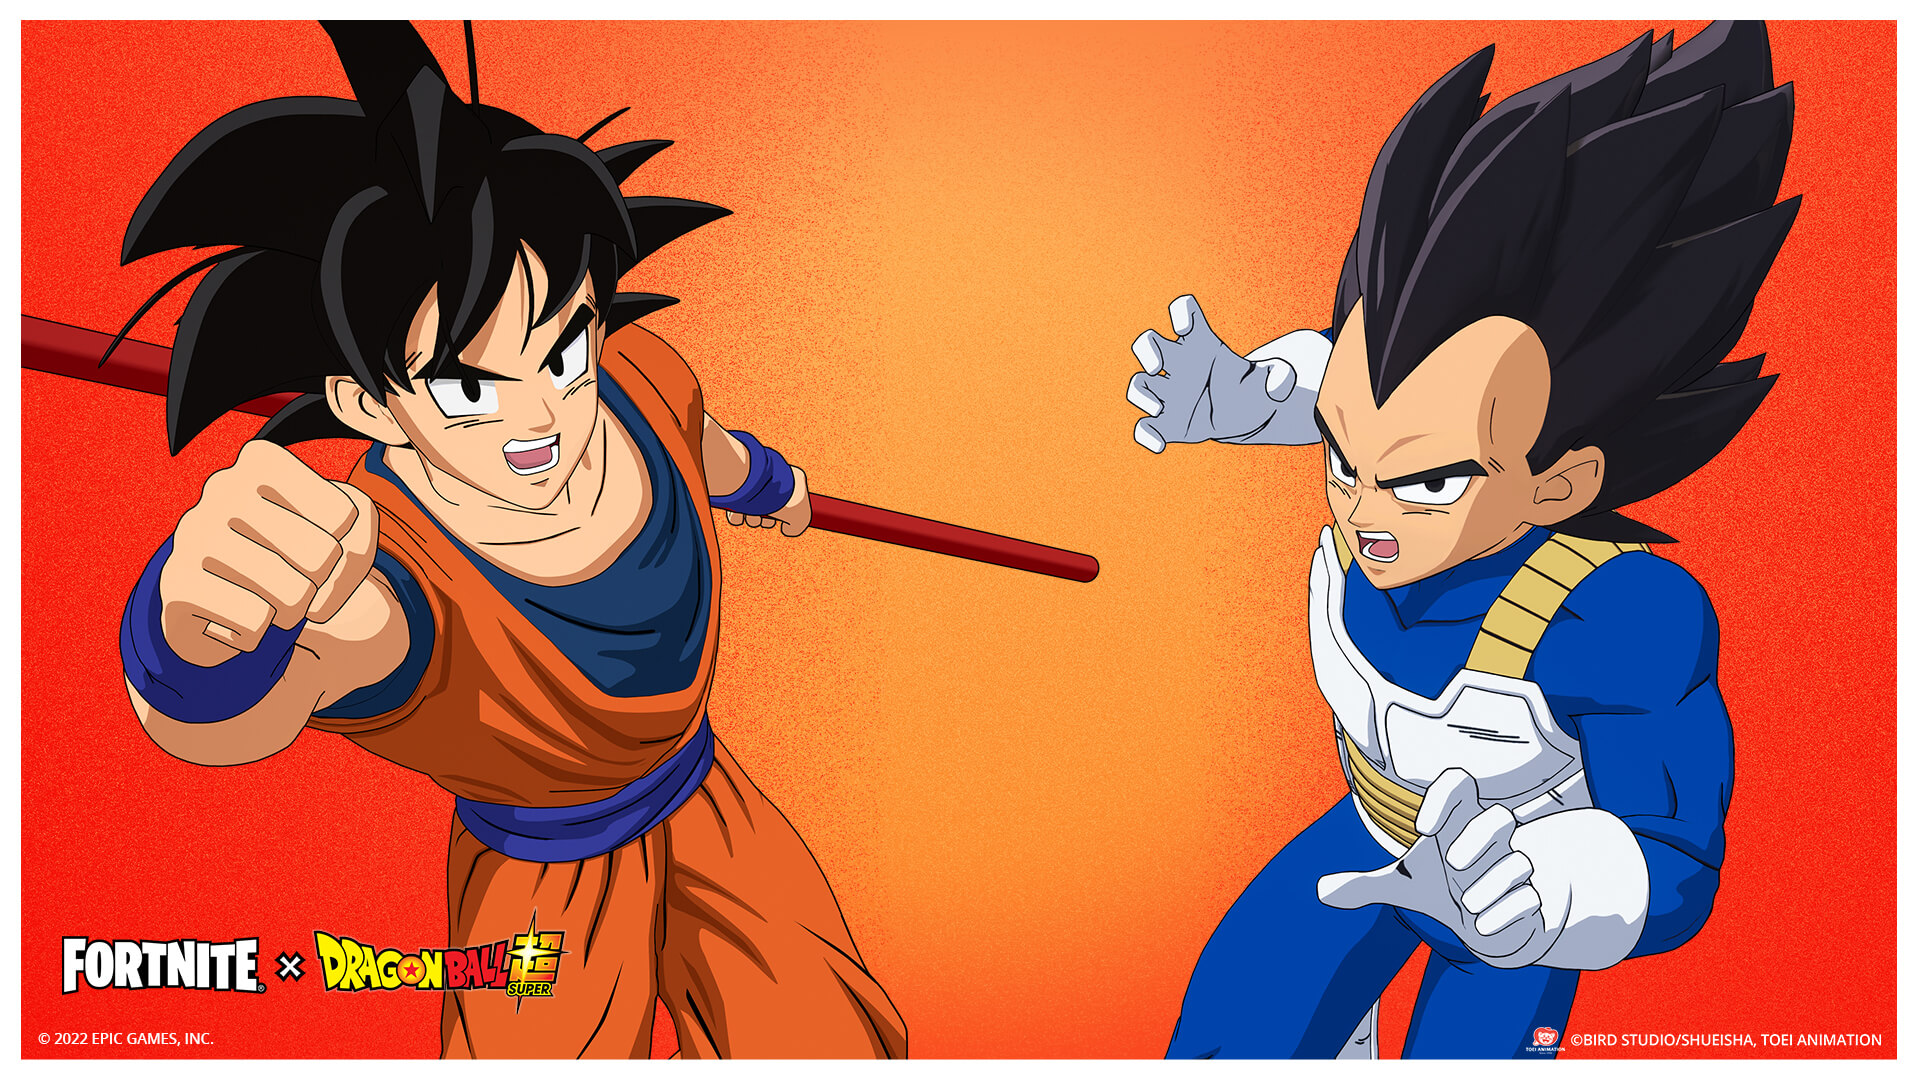 Download Make your battle for victory come to life with Dragon Ball Z 4k  PC. Wallpaper